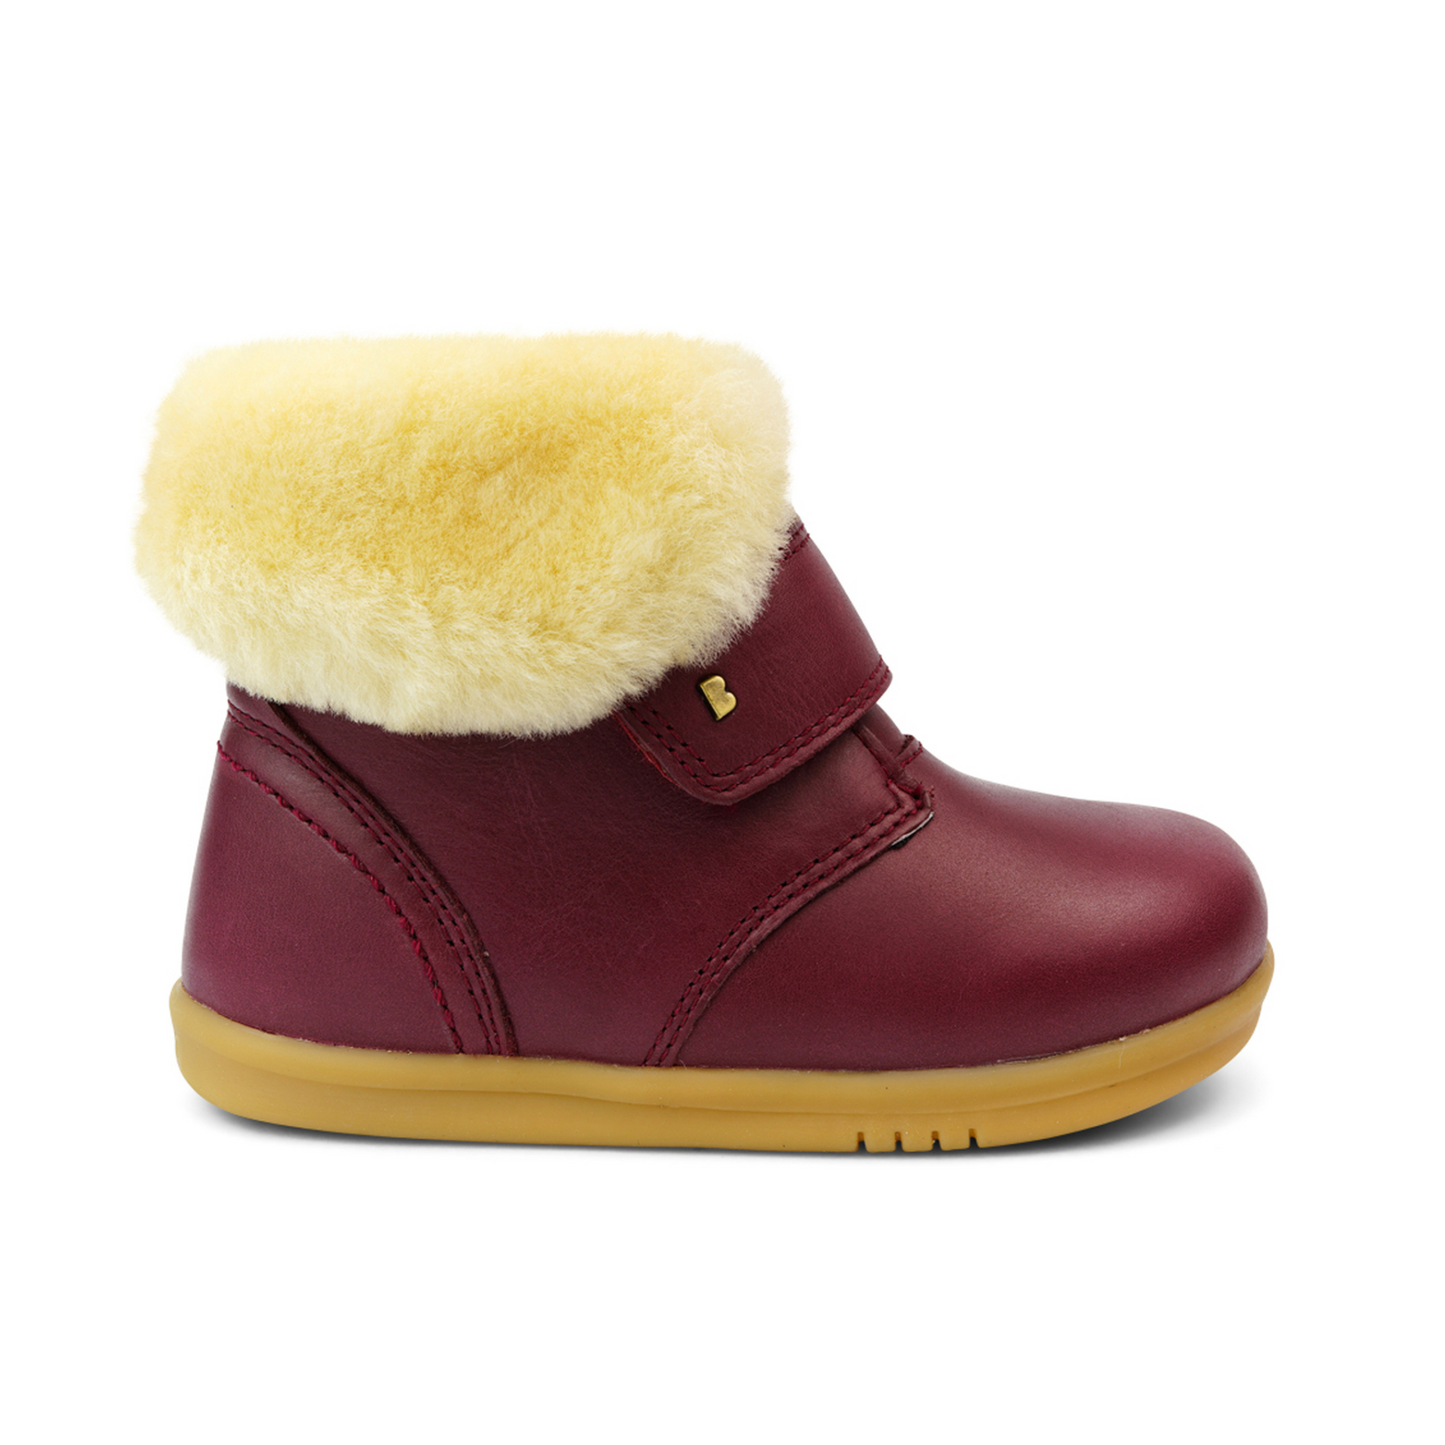 Desert Arctic Lined Boot in Boysenberry Leather IW